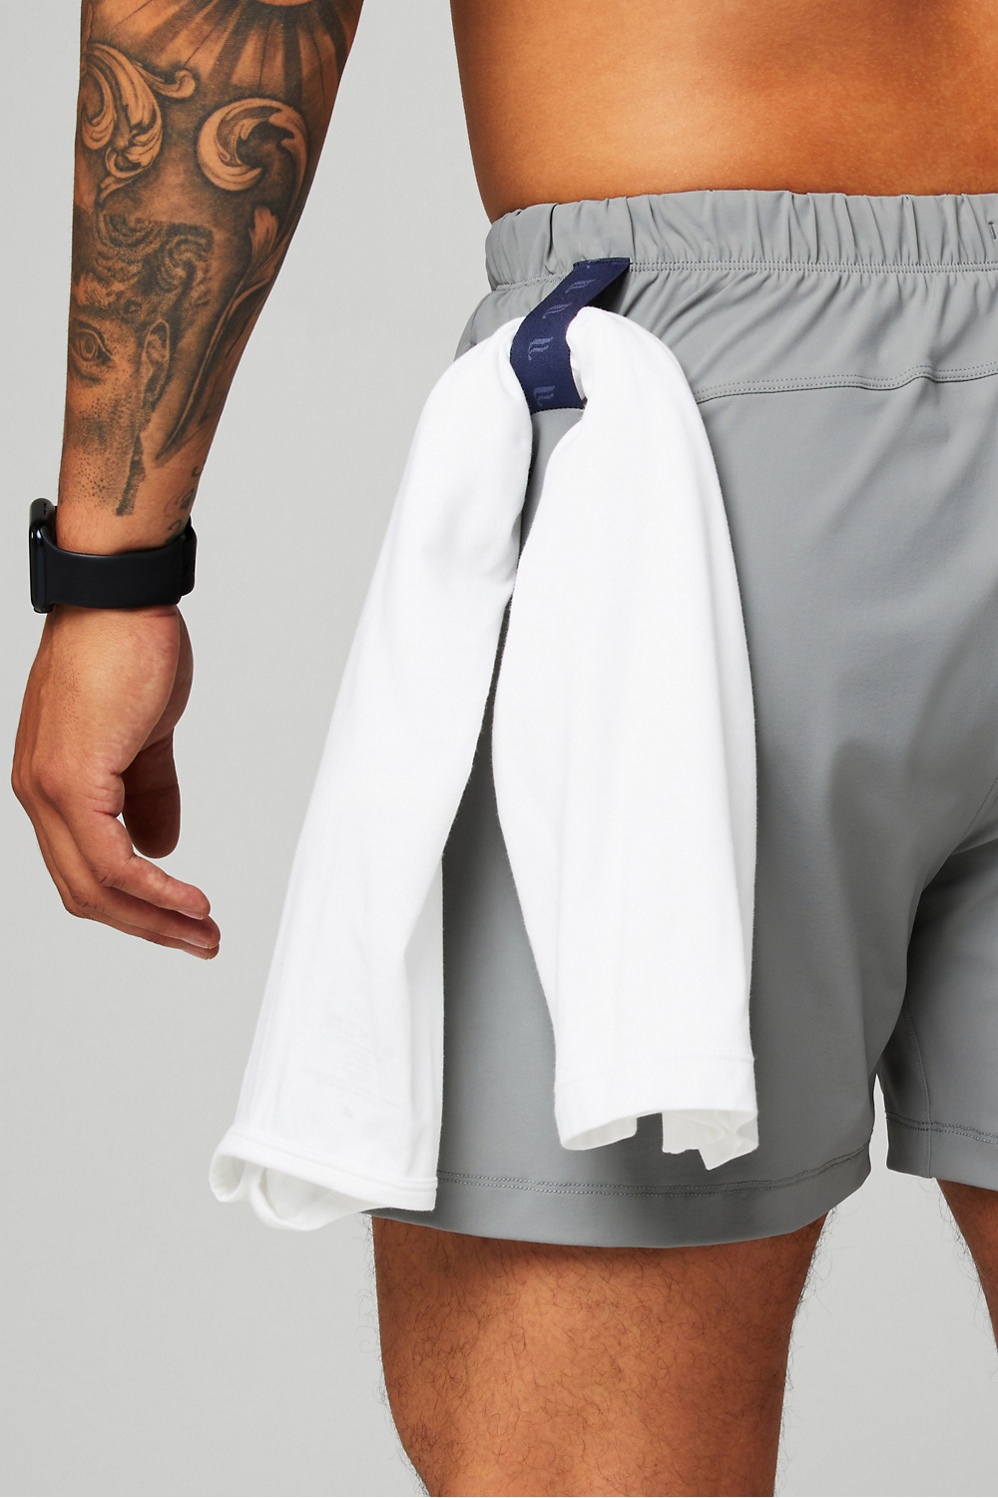 2-in-1 Shorts Zeroweight 5IN